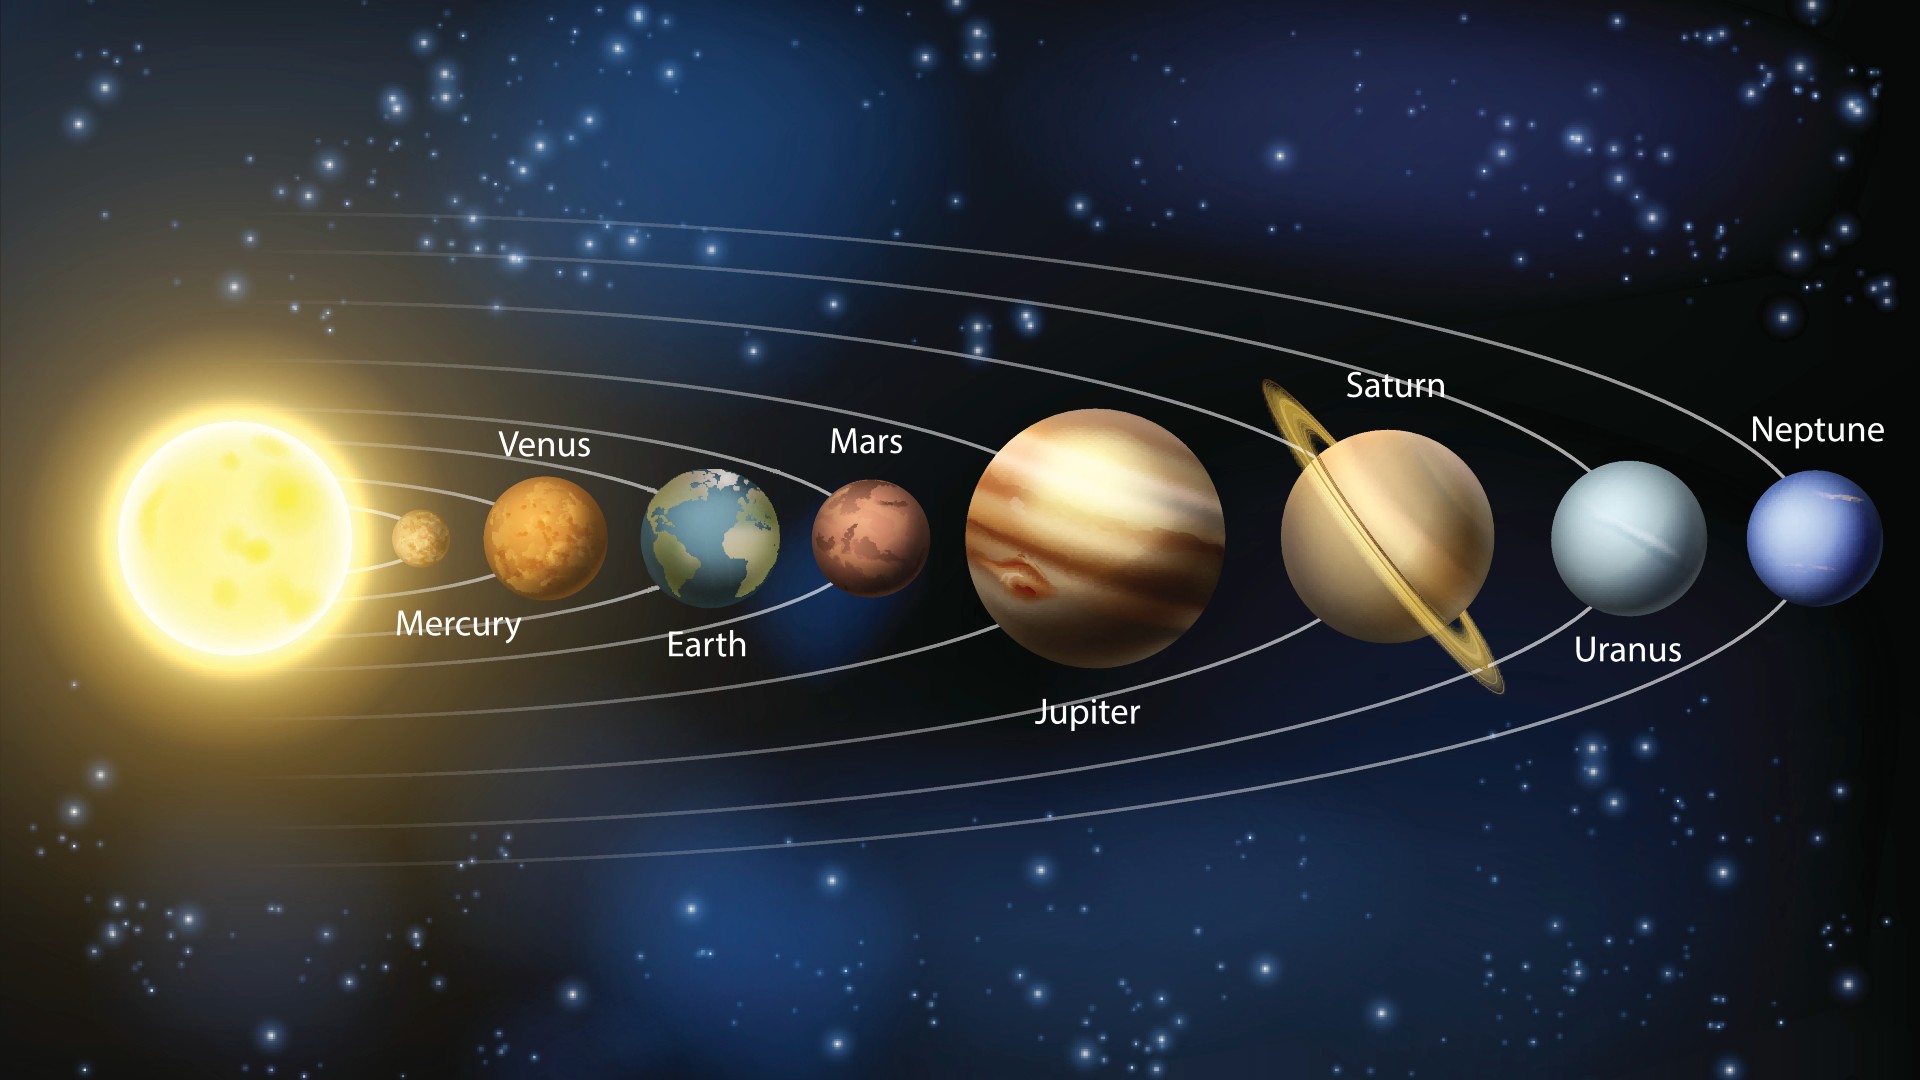 A diagram of the planets in our solar system with the names of the planets.  From left to right: Sun (bright yellow), Mercury (smallest, brown), Venus (slightly larger, reddish-brown), Earth (slightly larger, blue and green), Mars (slightly smaller, red ), Jupiter (largest, brown and beige), Saturn (slightly smaller, beige with a yellow ring around it), Uranus (smaller but larger than Earth, gray) and Neptune (slightly smaller, son).  There are also white rings that show the orbit of each planet.